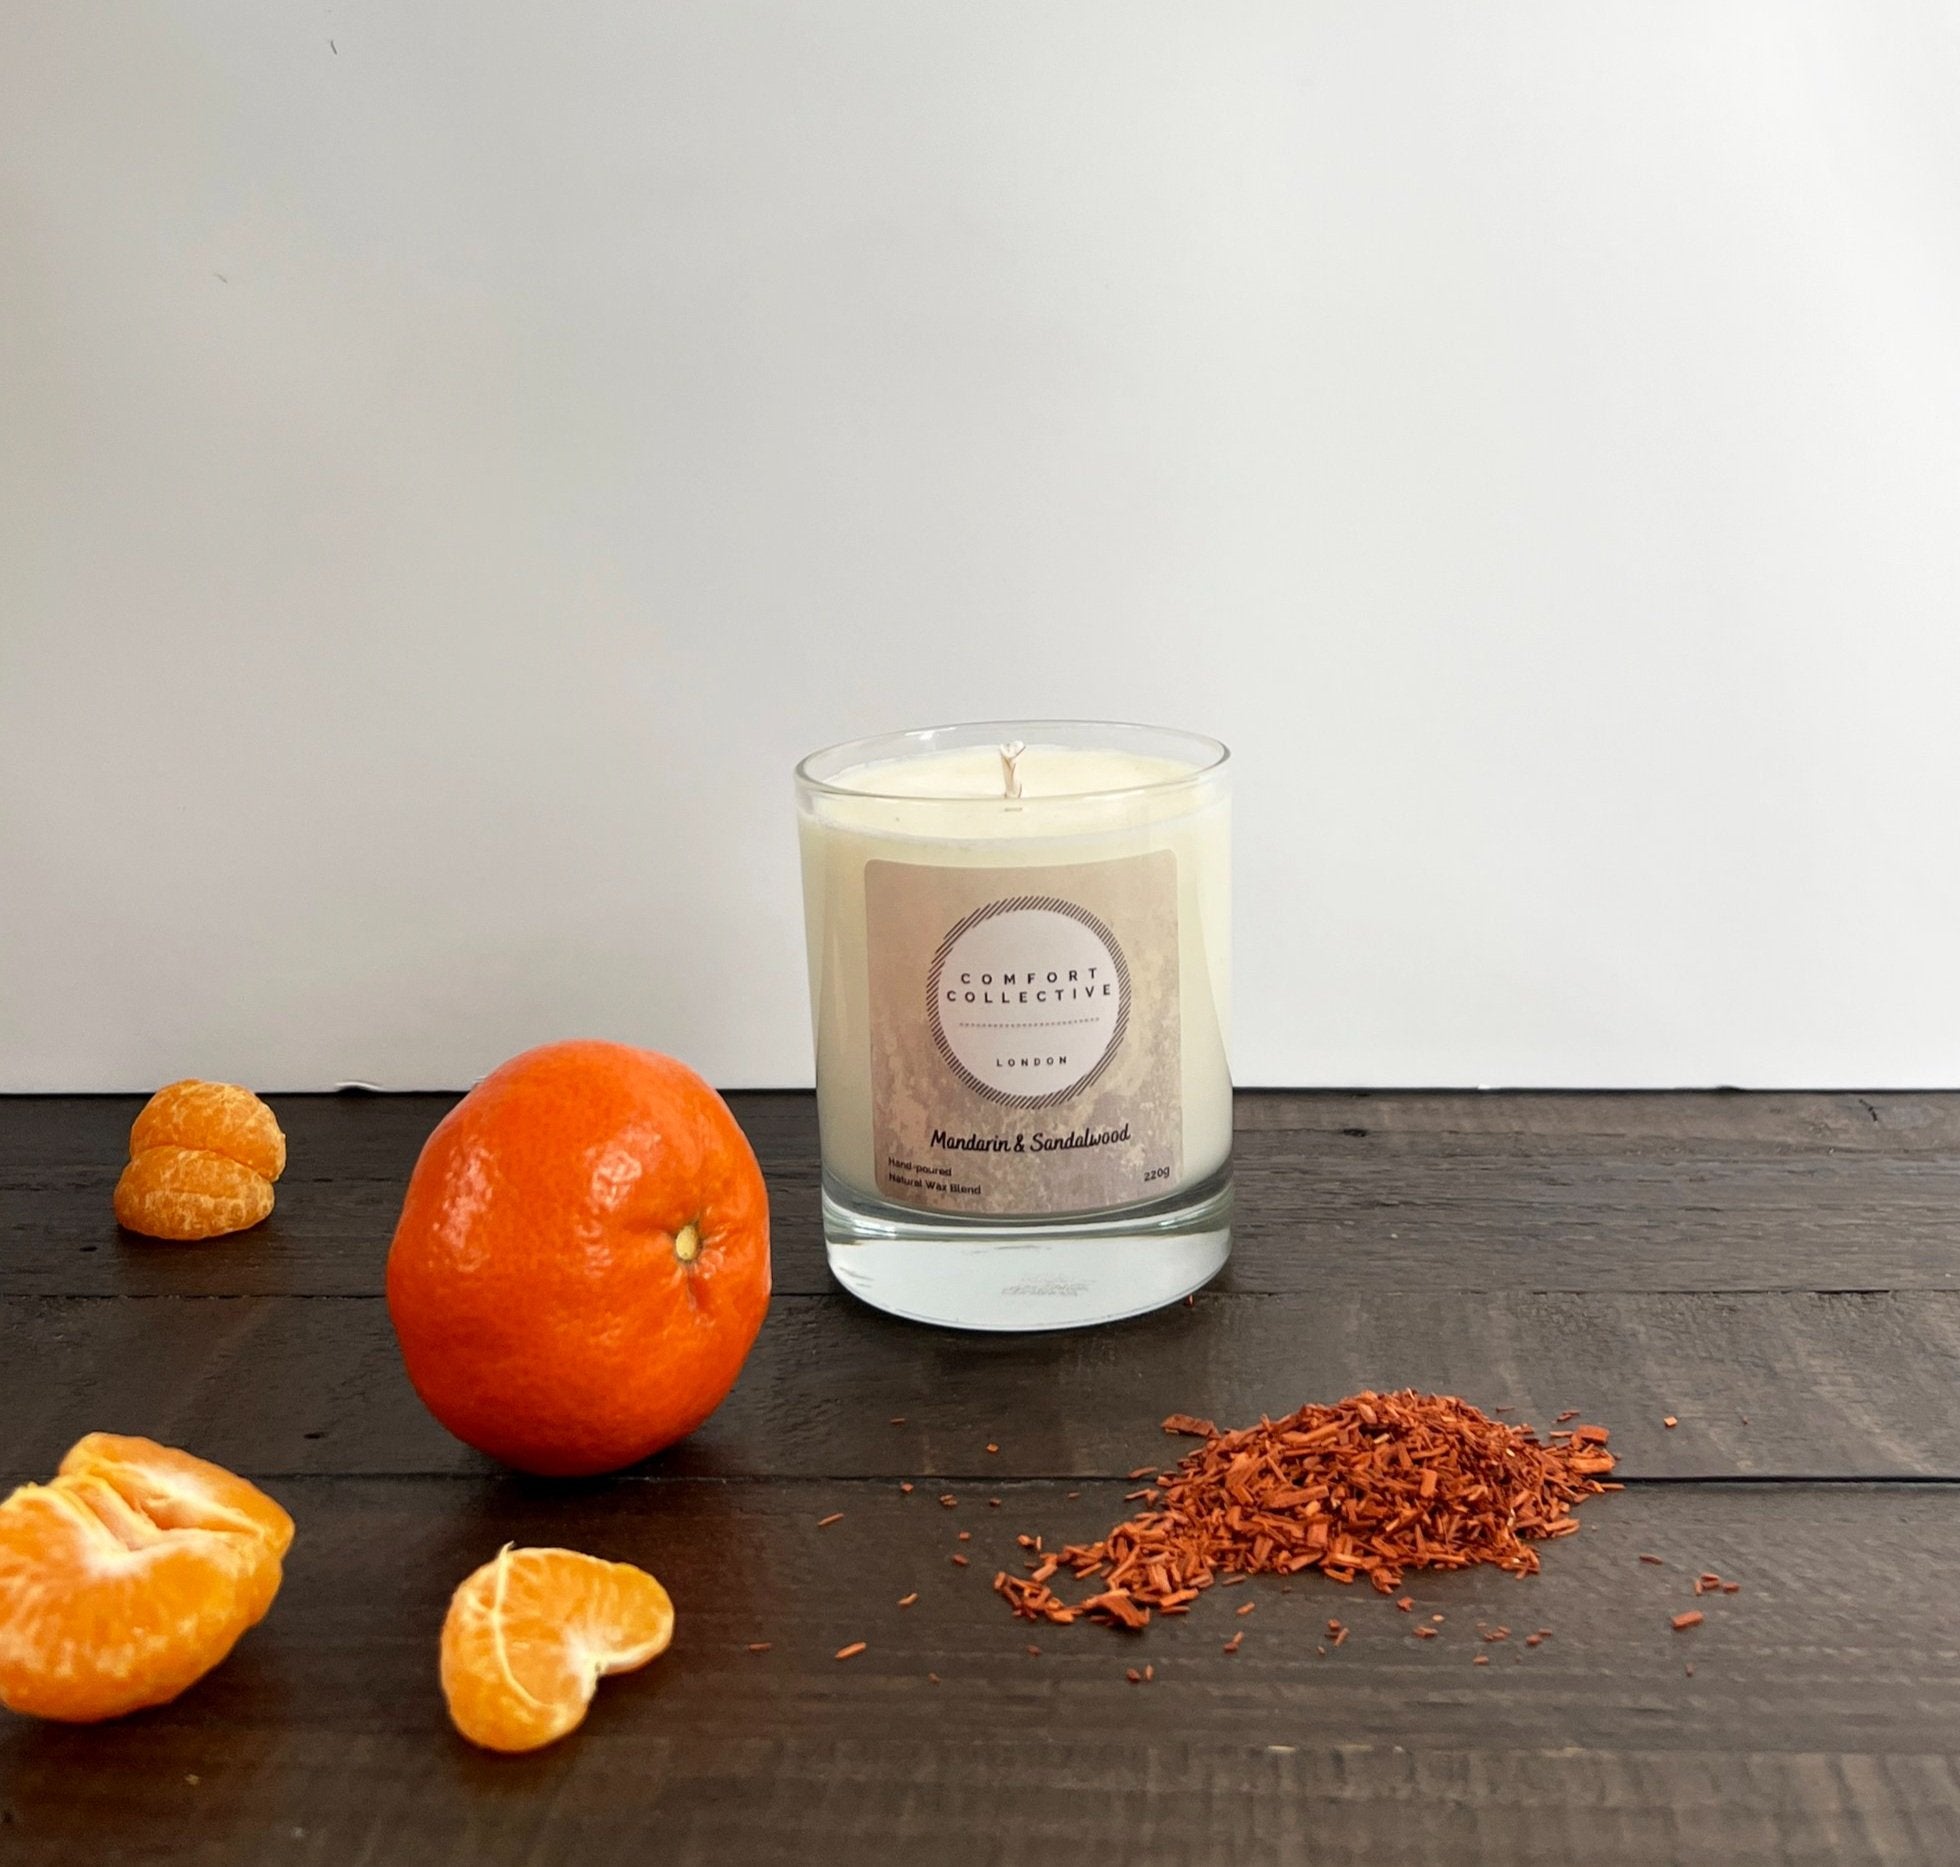 Hand Poured Candle -Signature Collection -  Mandarin & Sandlewood by Comfort Collective London